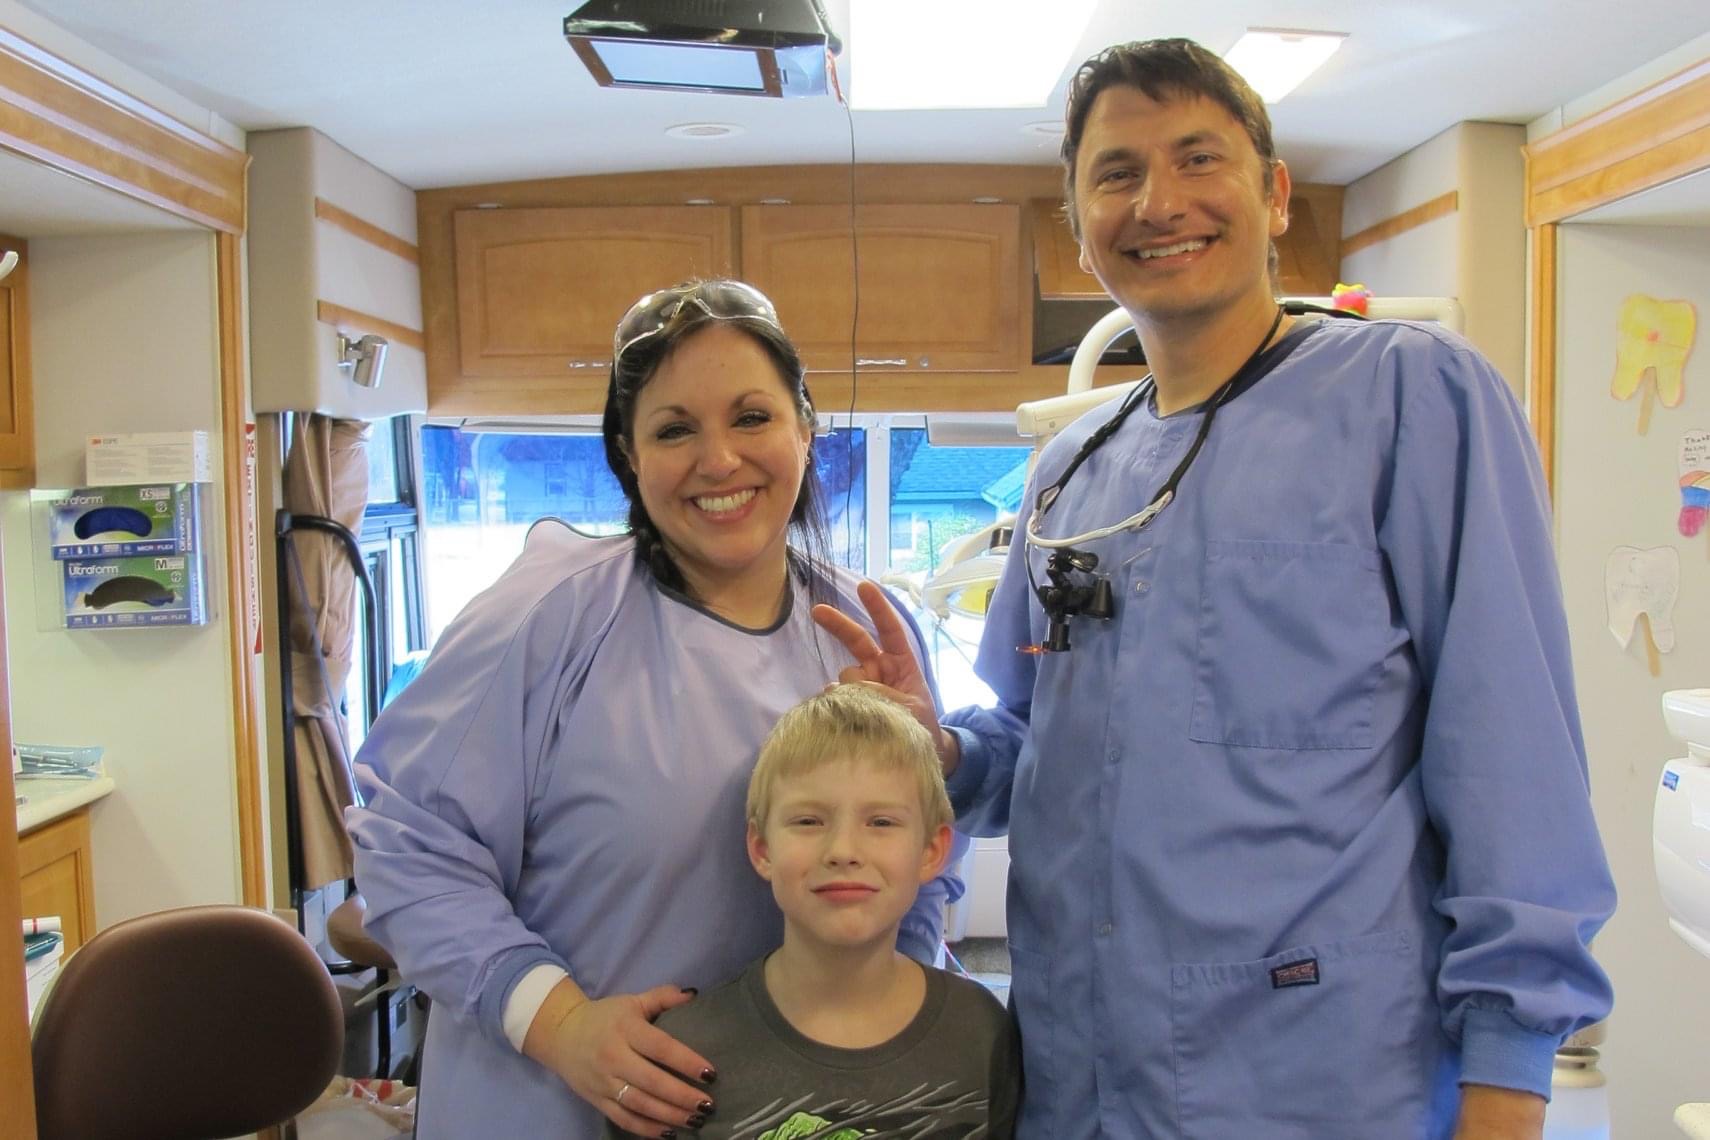 Dental team member and young patient smiling together